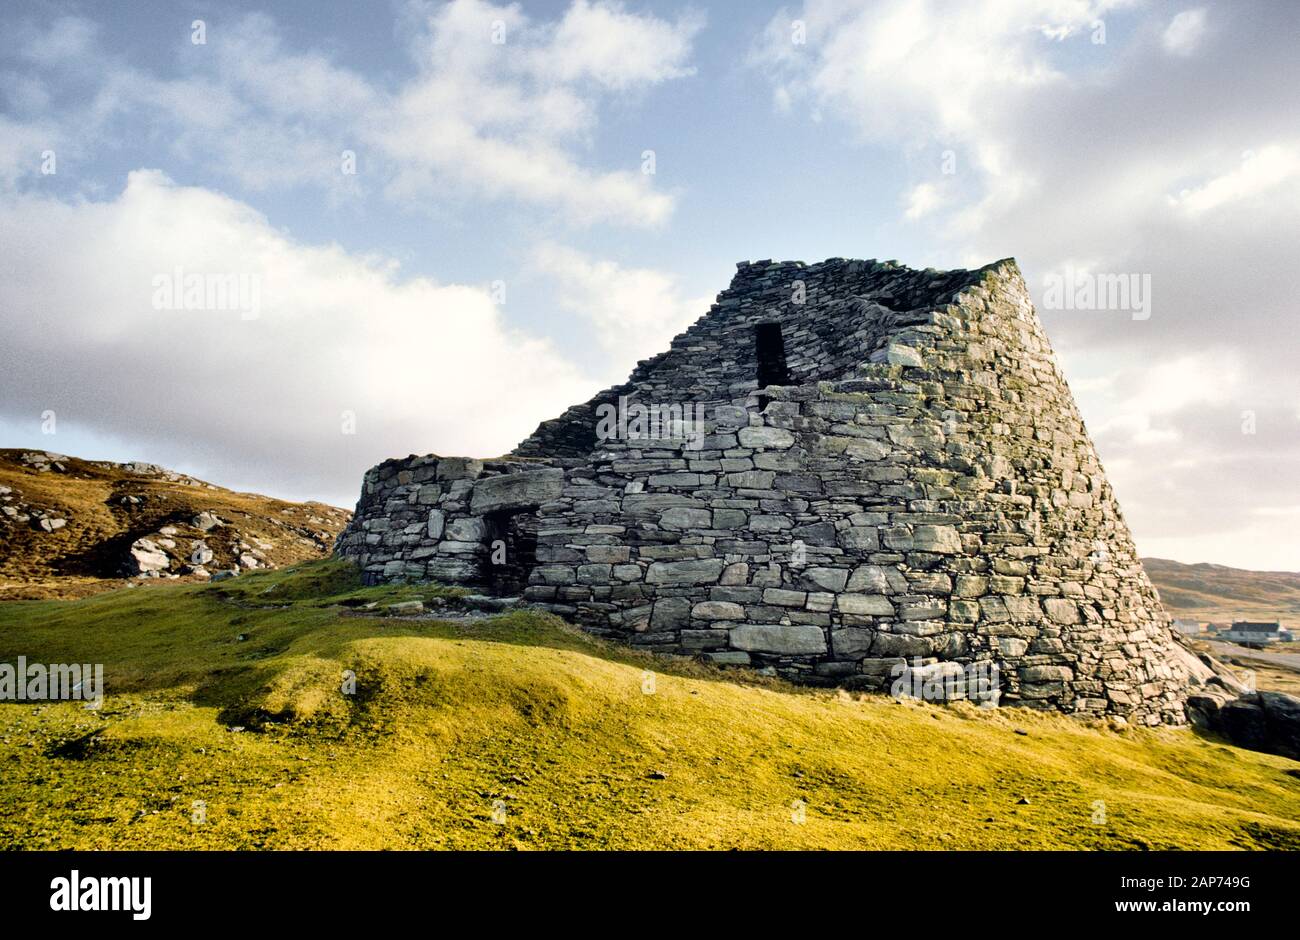 Dun Carloway broch, Isle of Lewis, Outer Hebrides, Scotland, UK. Ancient stone fortified homestead approx 2000 years old Stock Photo